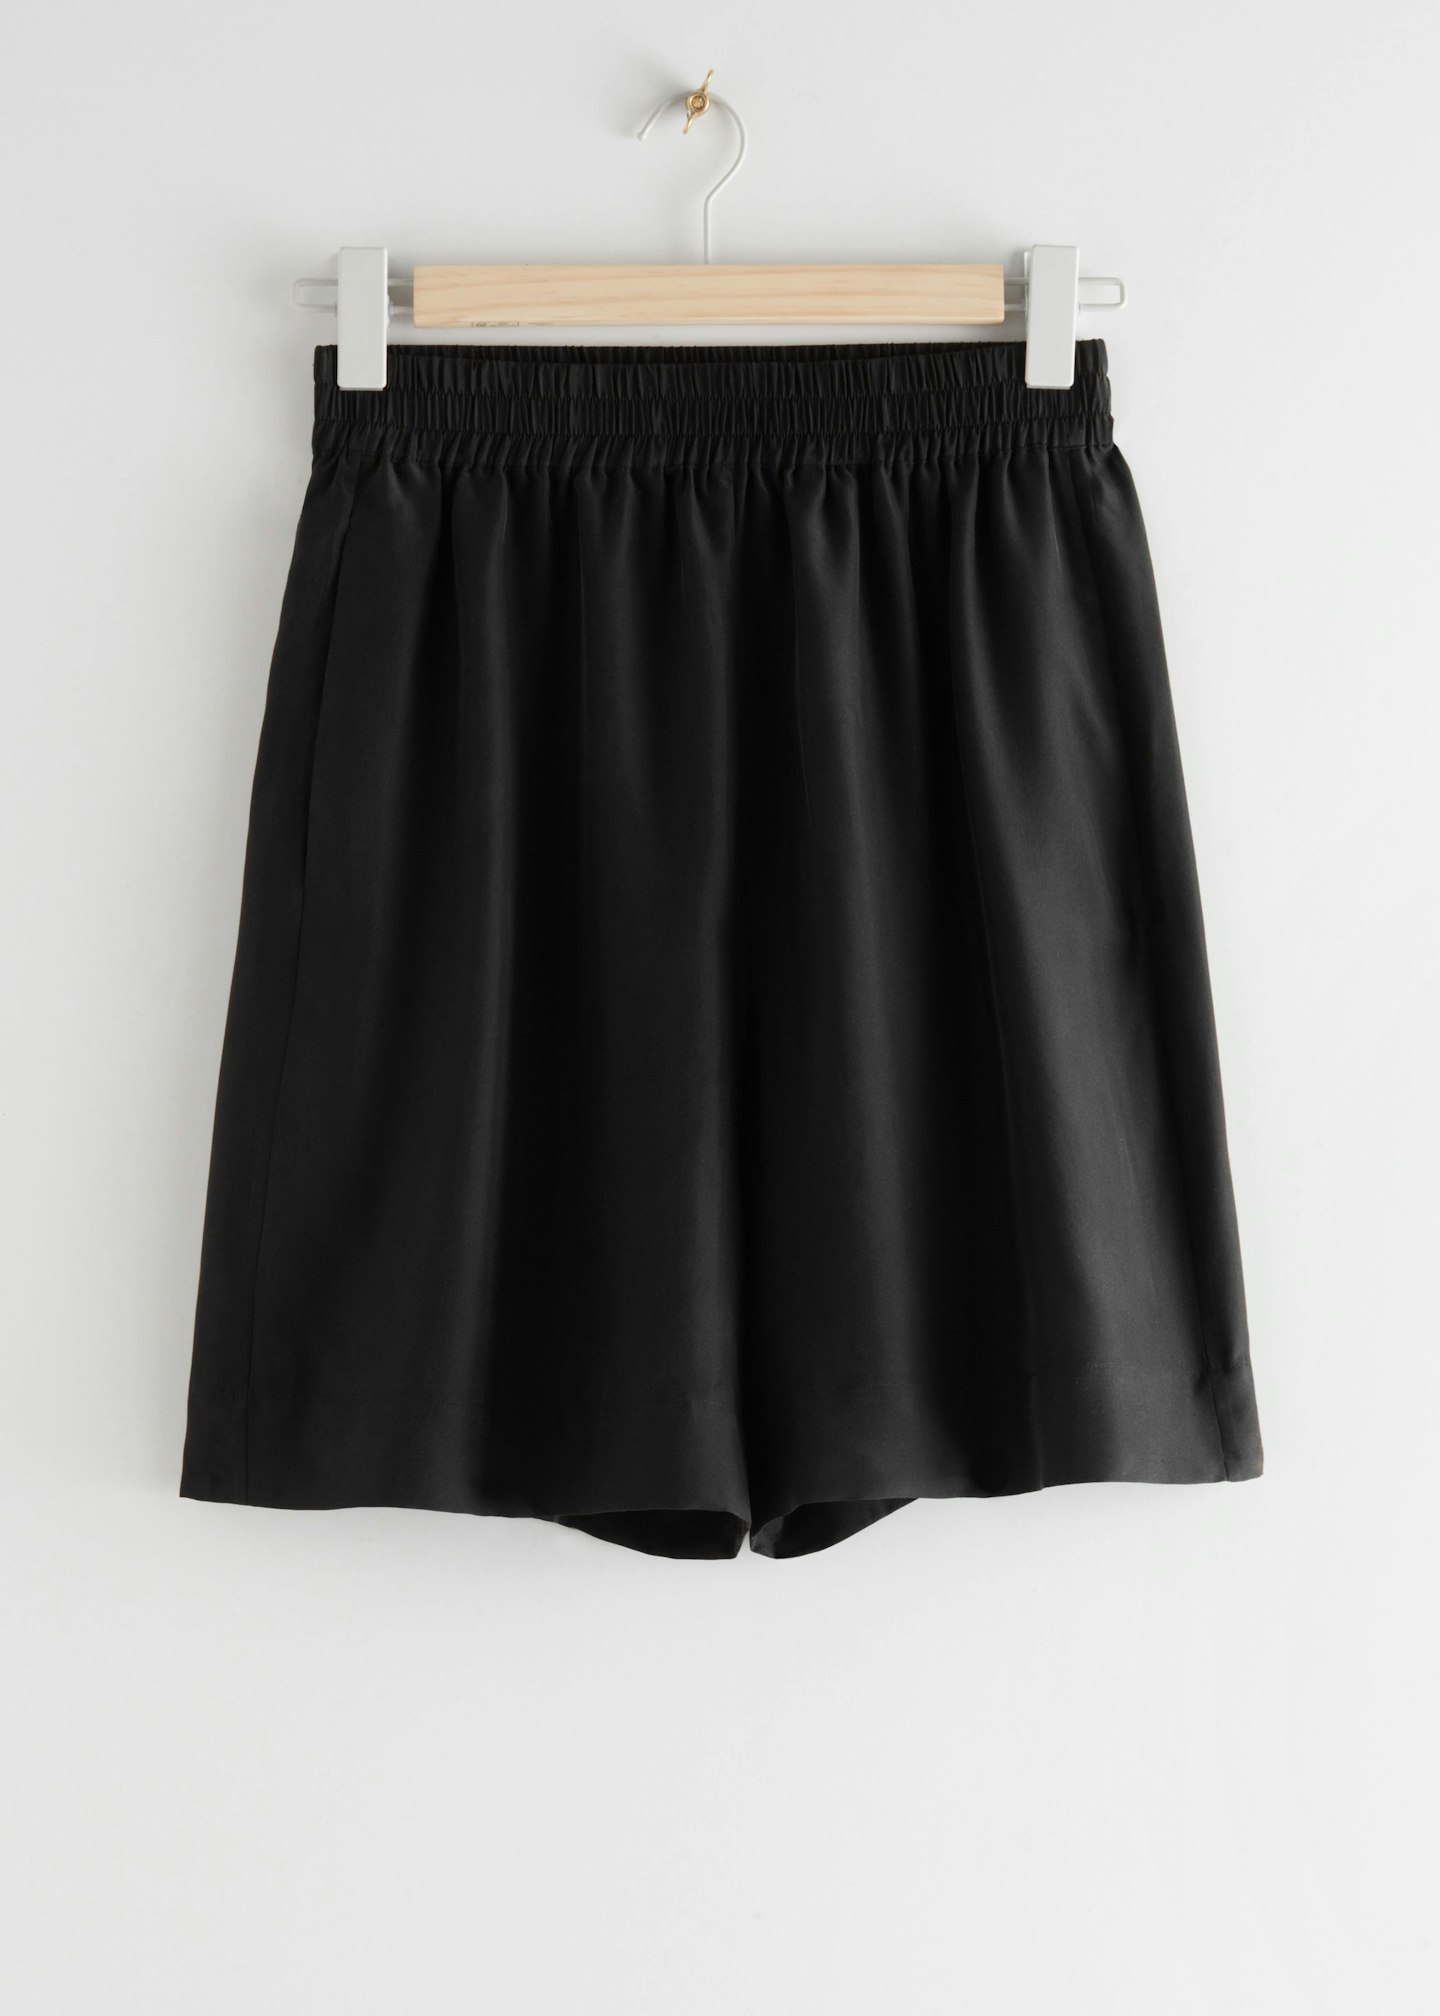 & Other Stories, Mulberry Silk Shorts, £69